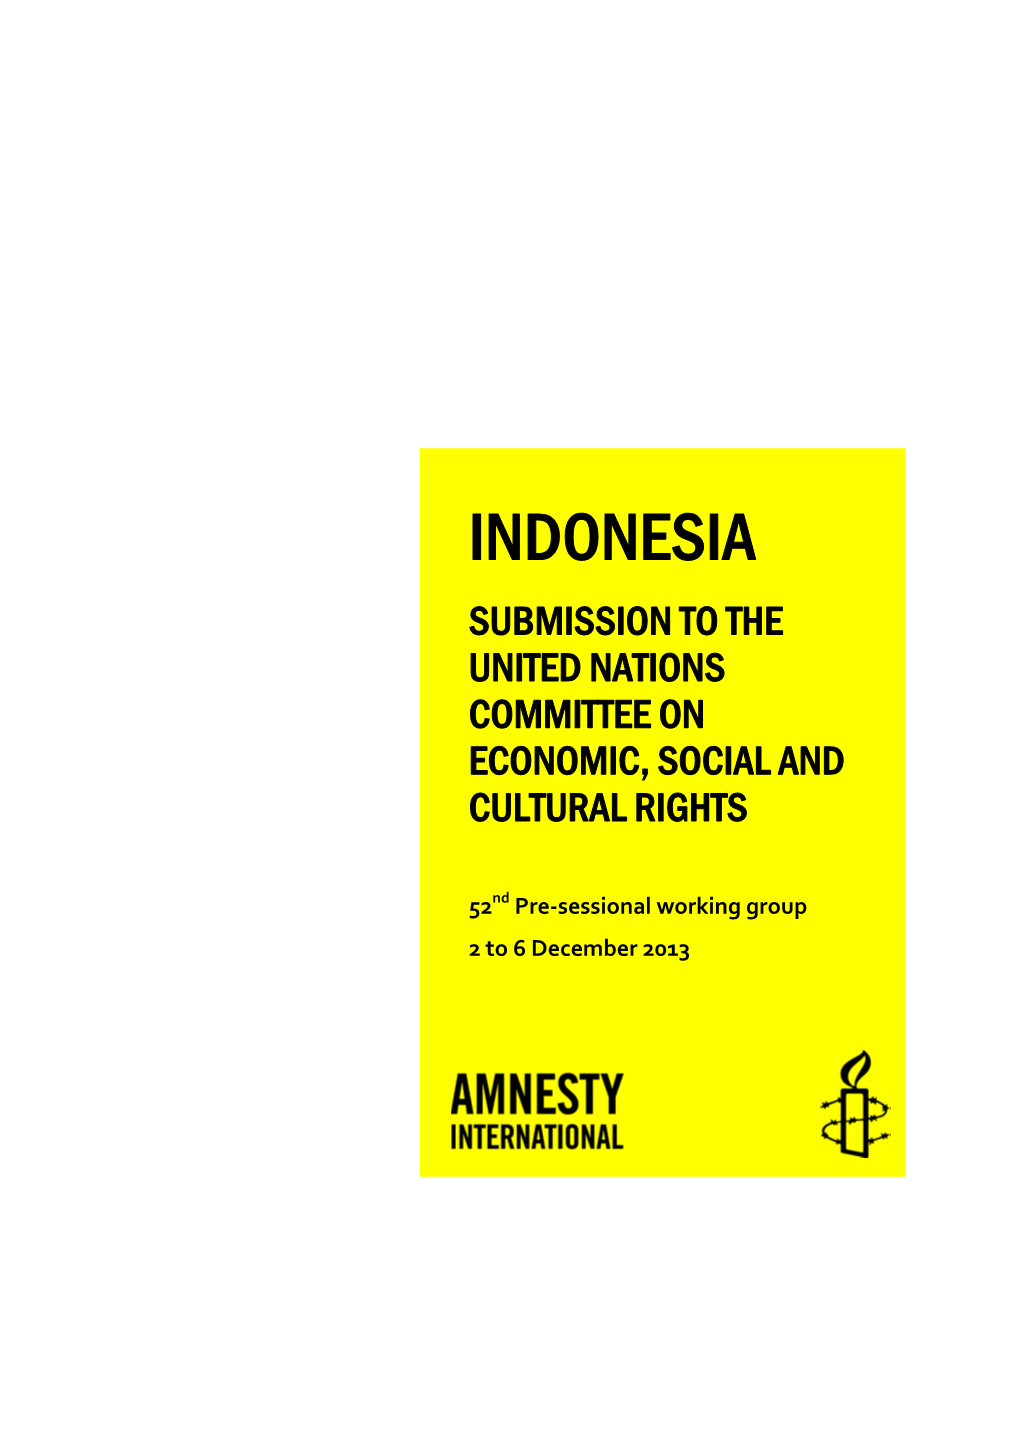 Indonesia Submission to the United Nations Committee on Economic, Social and Cultural Rights